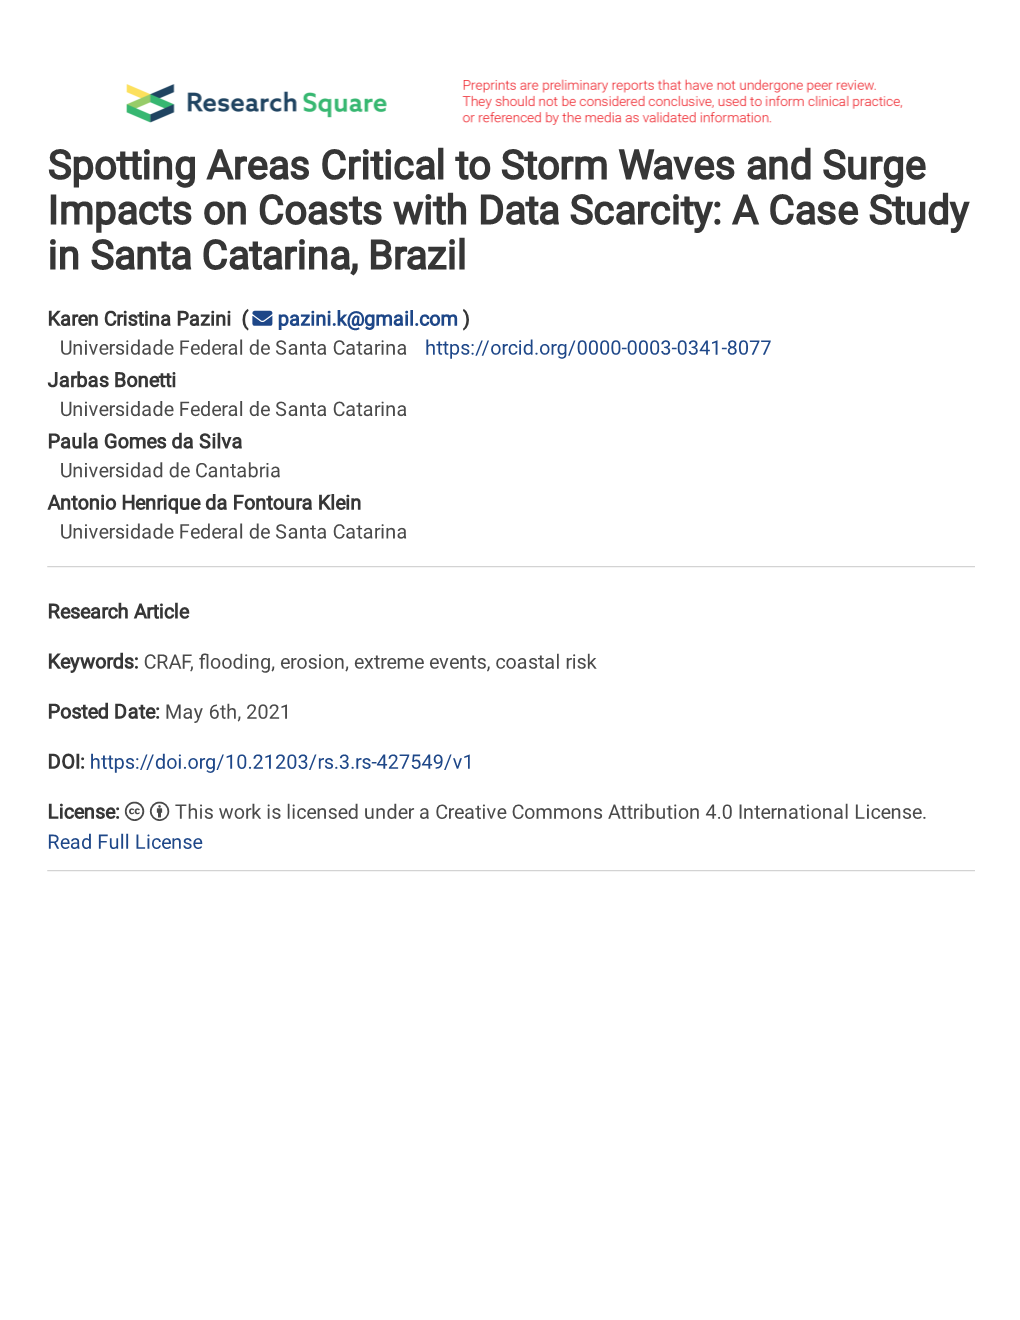 1 Spotting Areas Critical to Storm Waves and Surge Impacts on Coasts with Data 1 Scarcity: a Case Study in Santa Catarina, Brazi